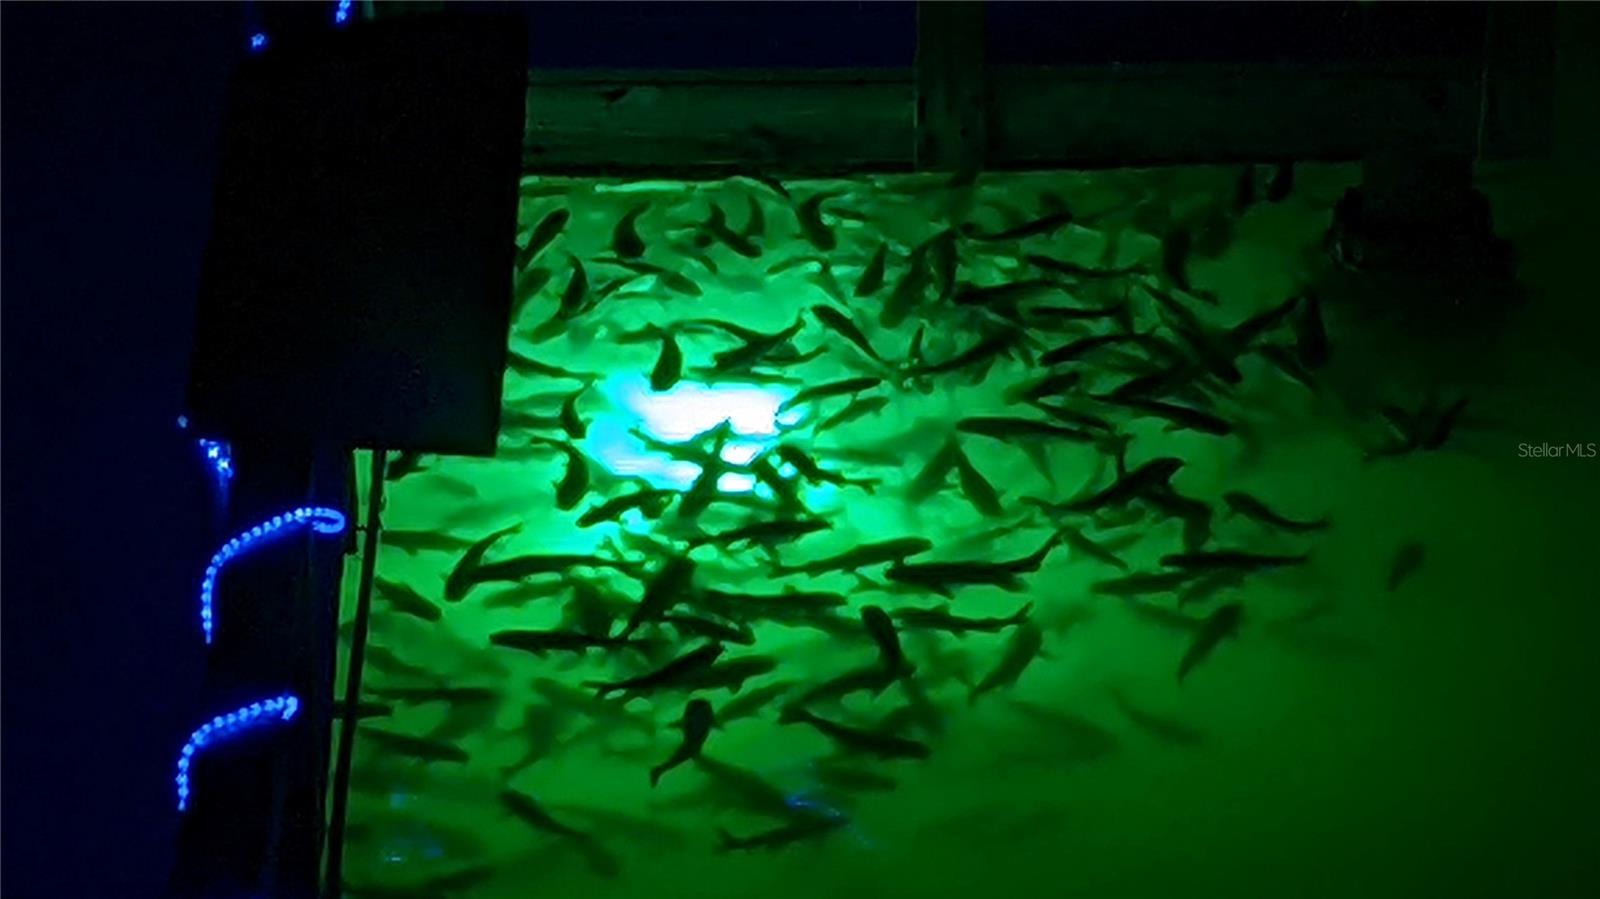 Fish attracted to the Green Light